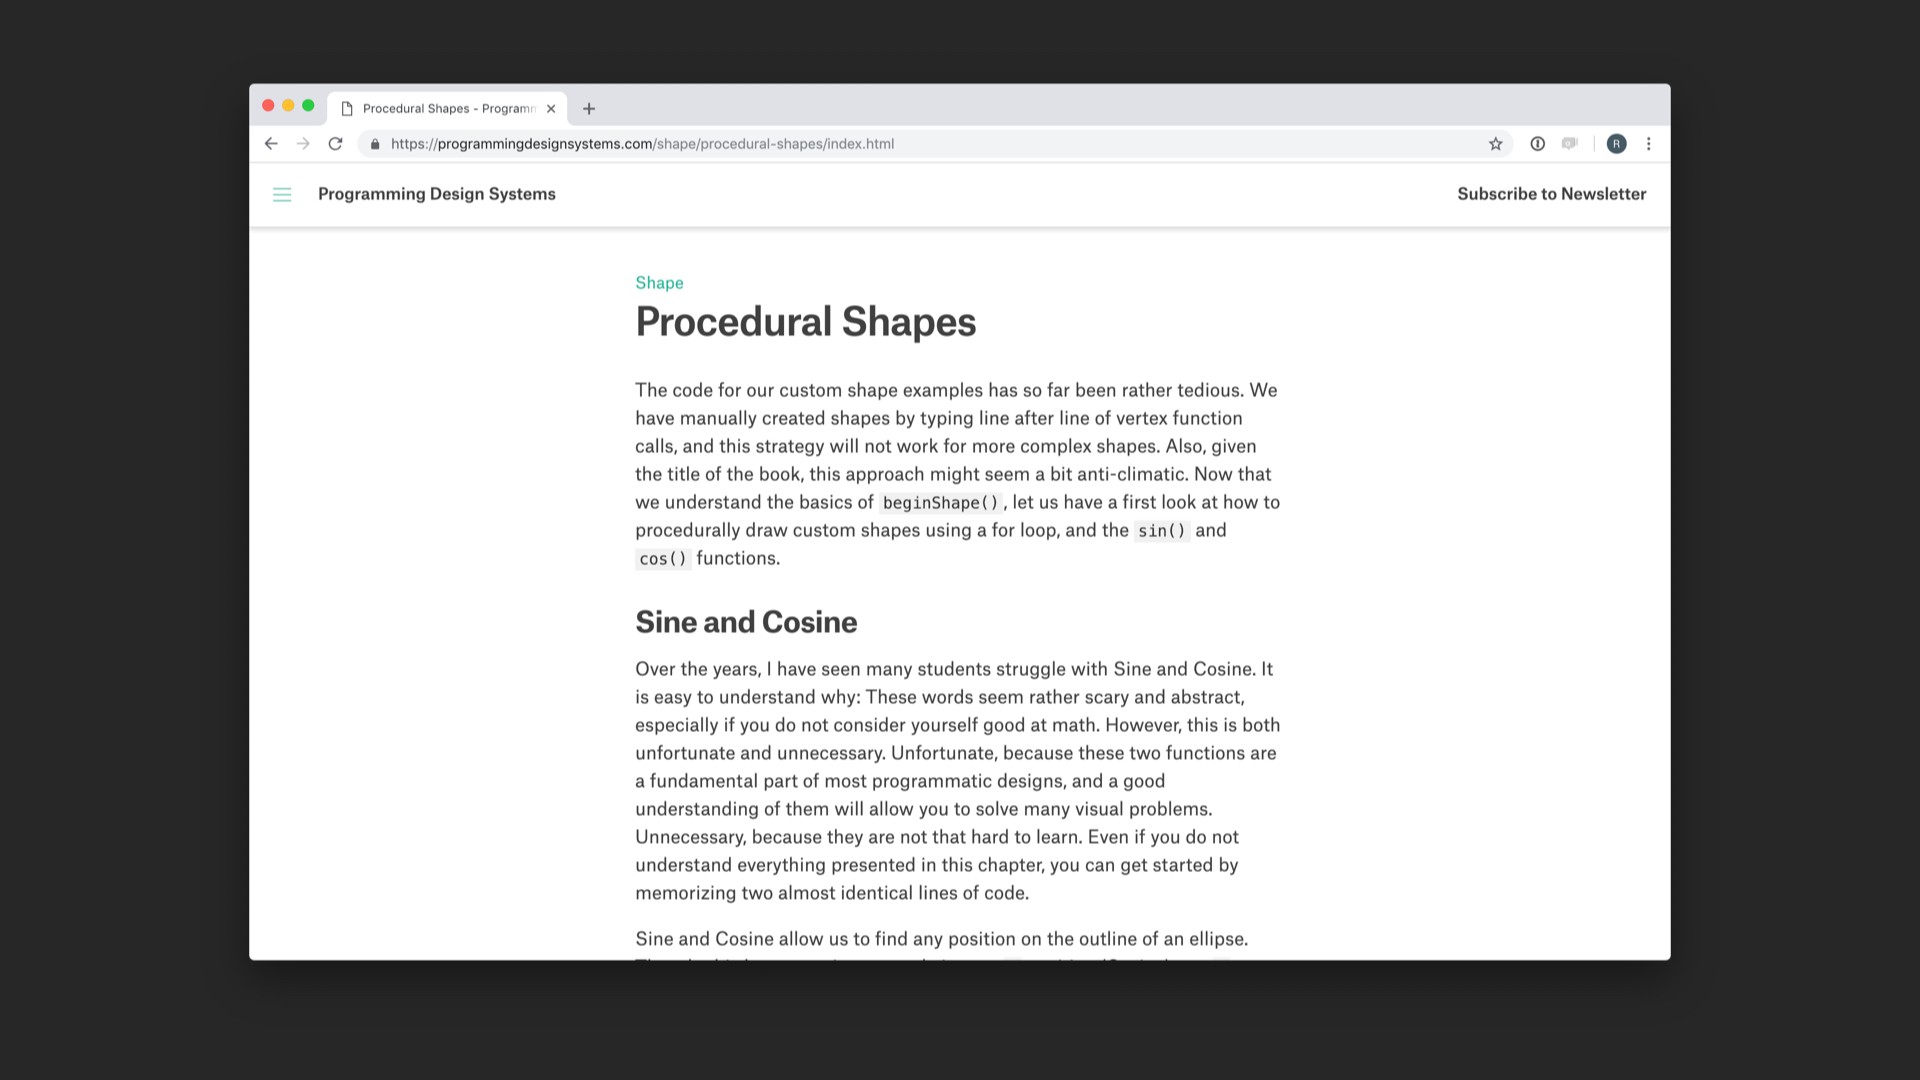 Screenshot of 'Procedural shapes' chapter of referenced website.